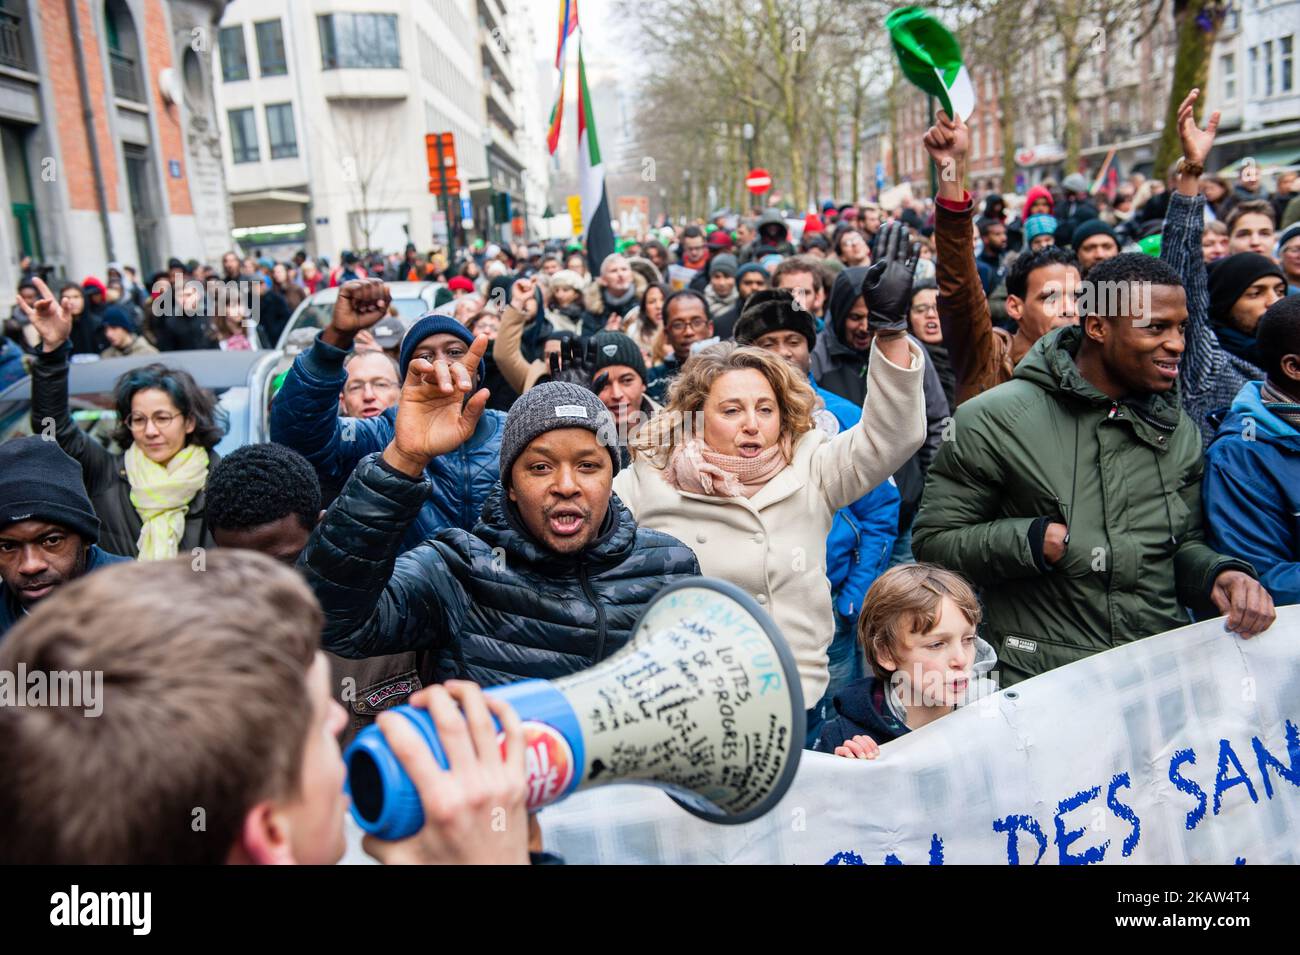 Around 8000 people gathered against Belgium's asylum and migration policy of the Belgian Secretary of State for Immigration, Theo Franken in Brussels, Belgium, on 13 January, 2018. After he ordered asylum seekers be returned to Sudan, where they say they fear for their lives. People are asking for his resign. Some politicians have suggested that the migration secretary, Theo Francken, the leader who invited the Sudanese officials to Belgium, should consider stepping down over his handling of the matter. Francken has said he has no plans to resign after appearing to mislead Parliament by tellin Stock Photo